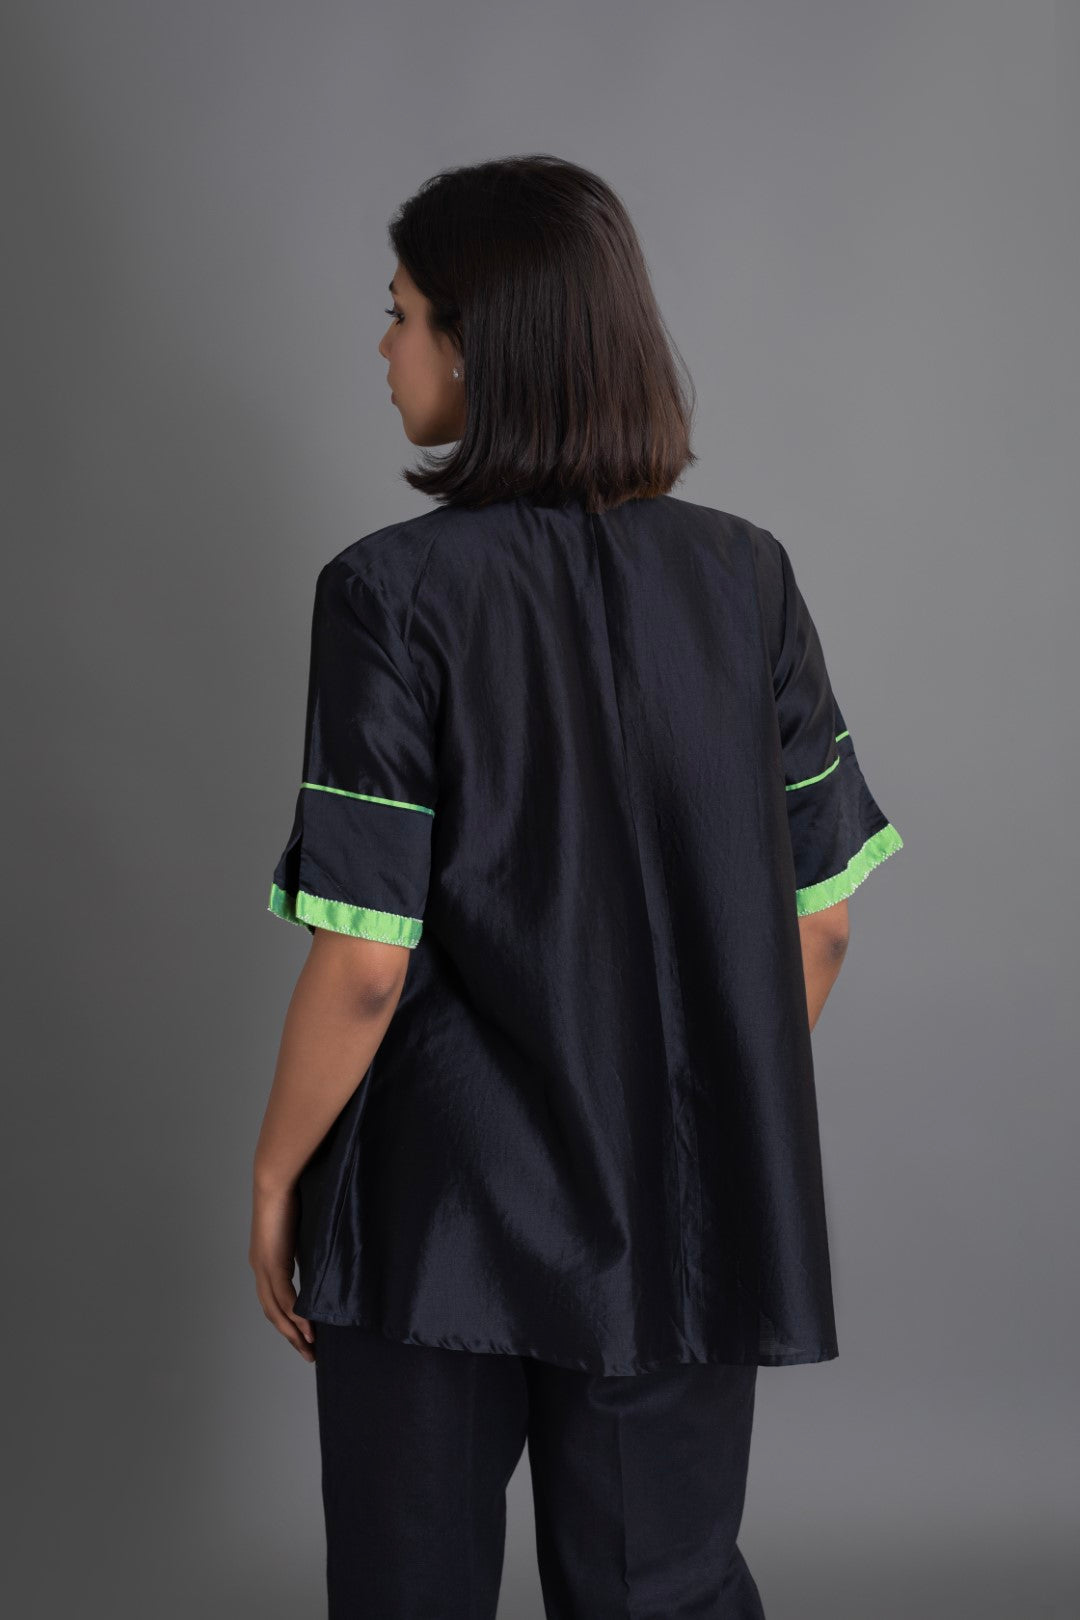 Obsidian Top with Lime collar and cuff